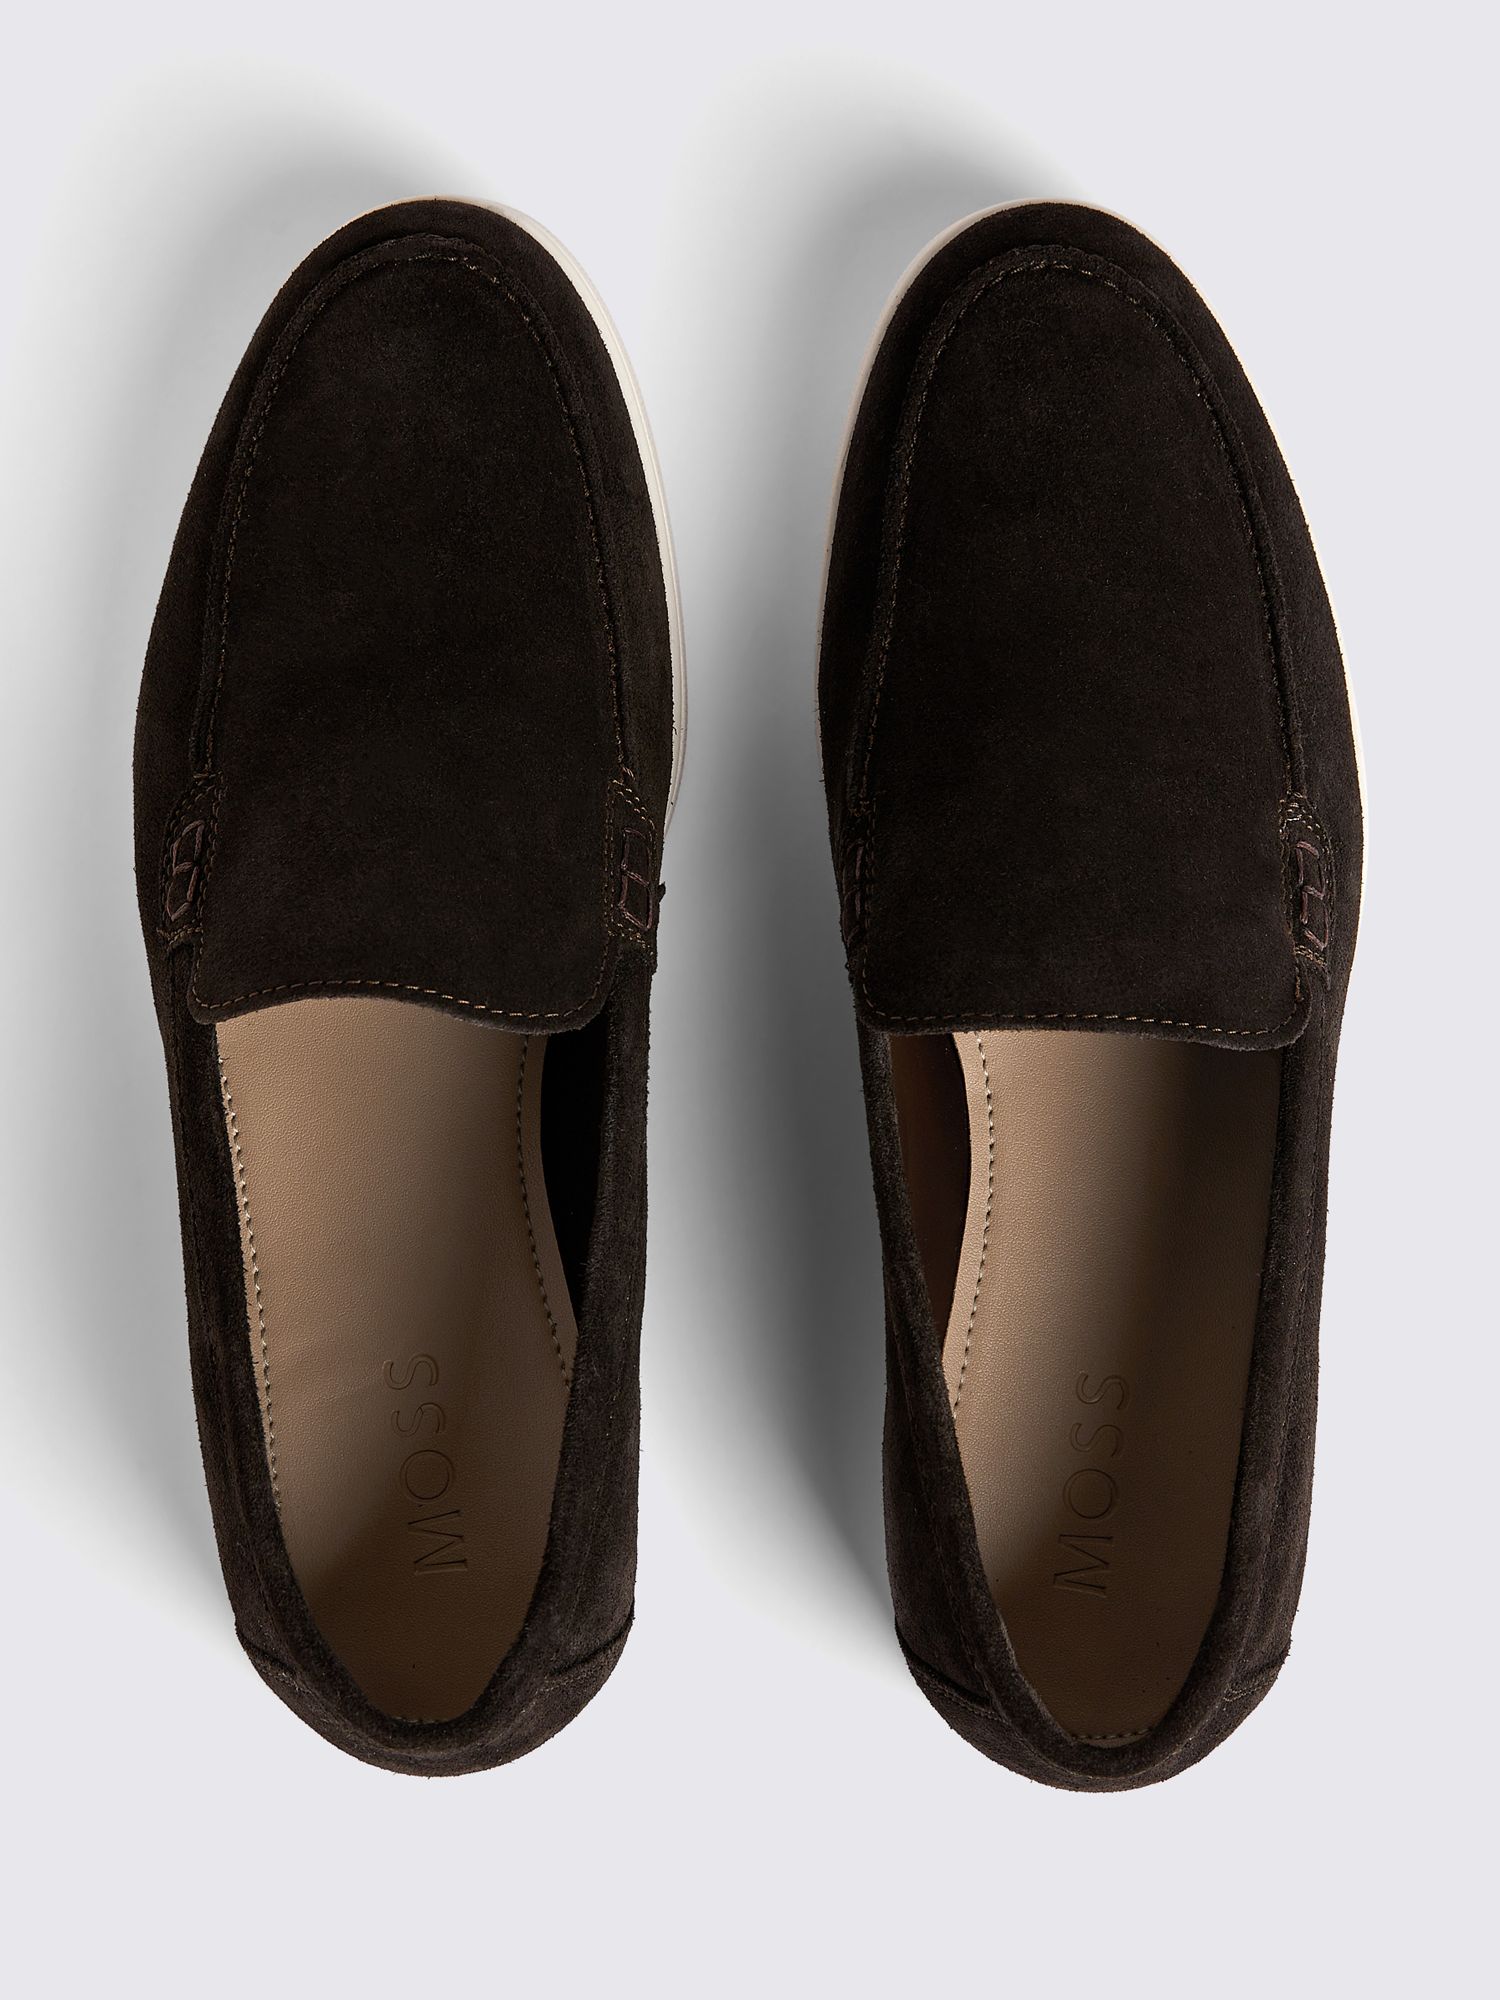 Moss Suede Casual Loafers, Brown, 9